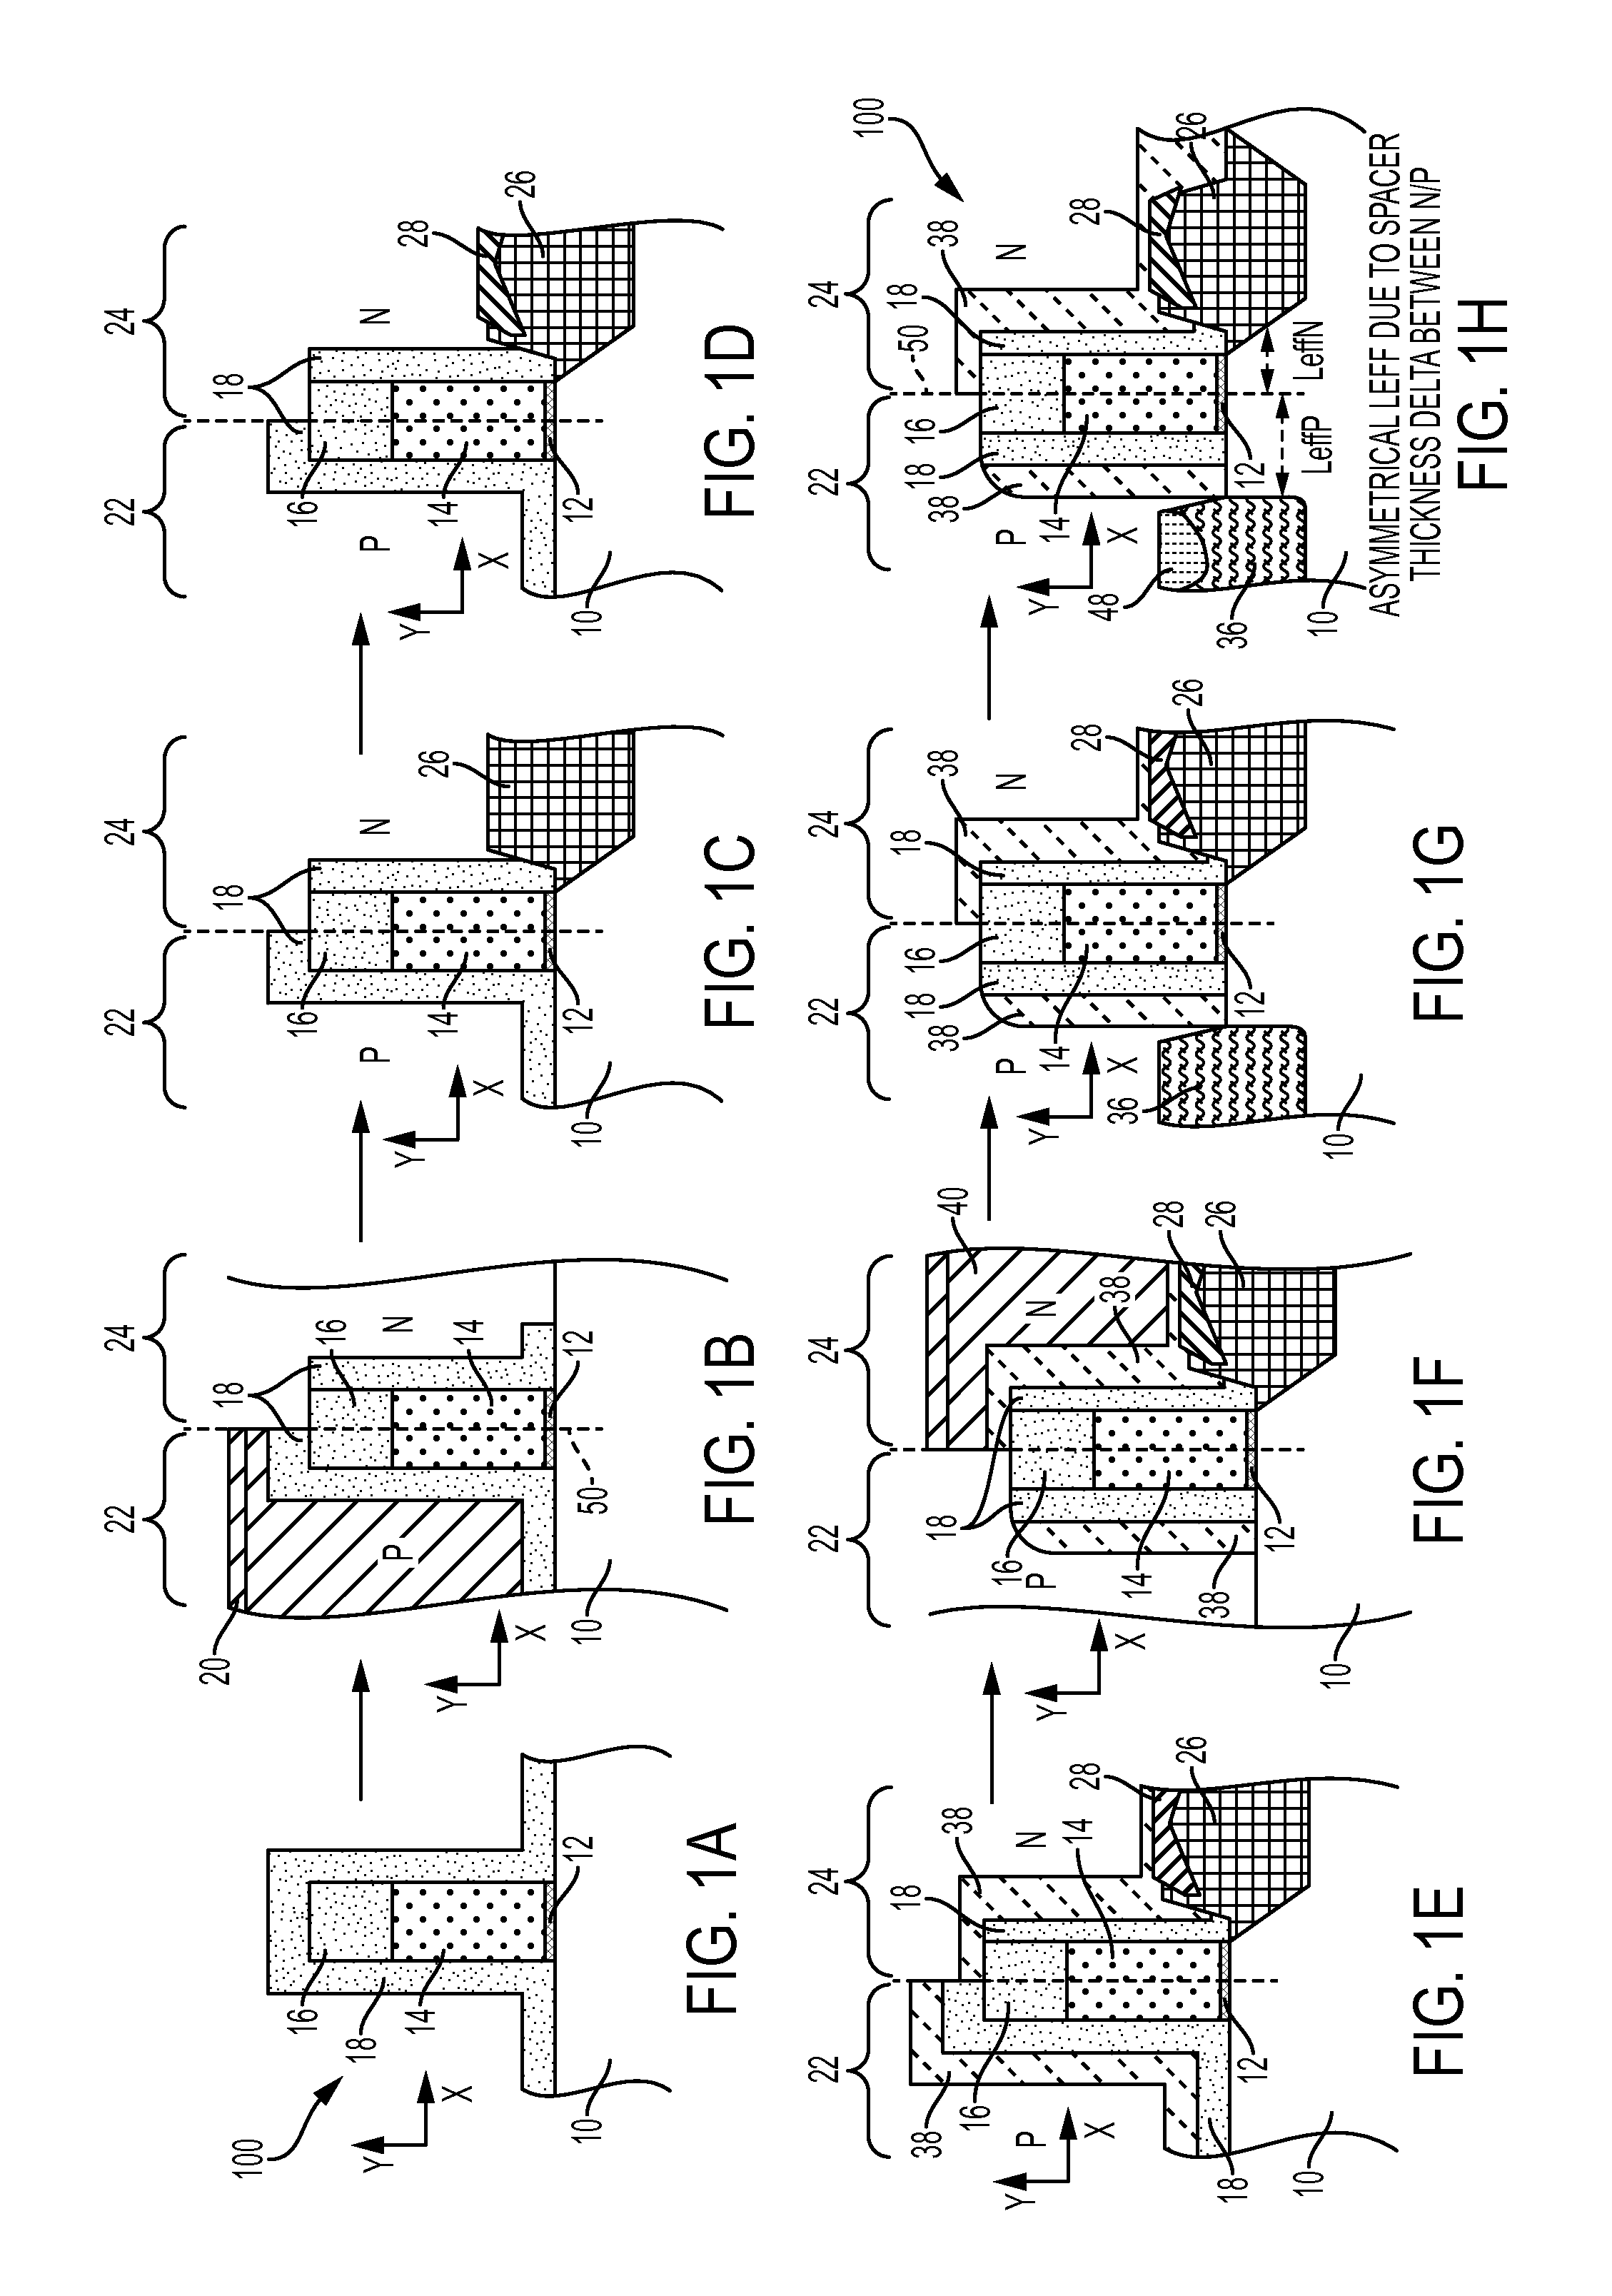 Symmetrical extension junction formation with low-k spacer and dual epitaxial process in finfet device